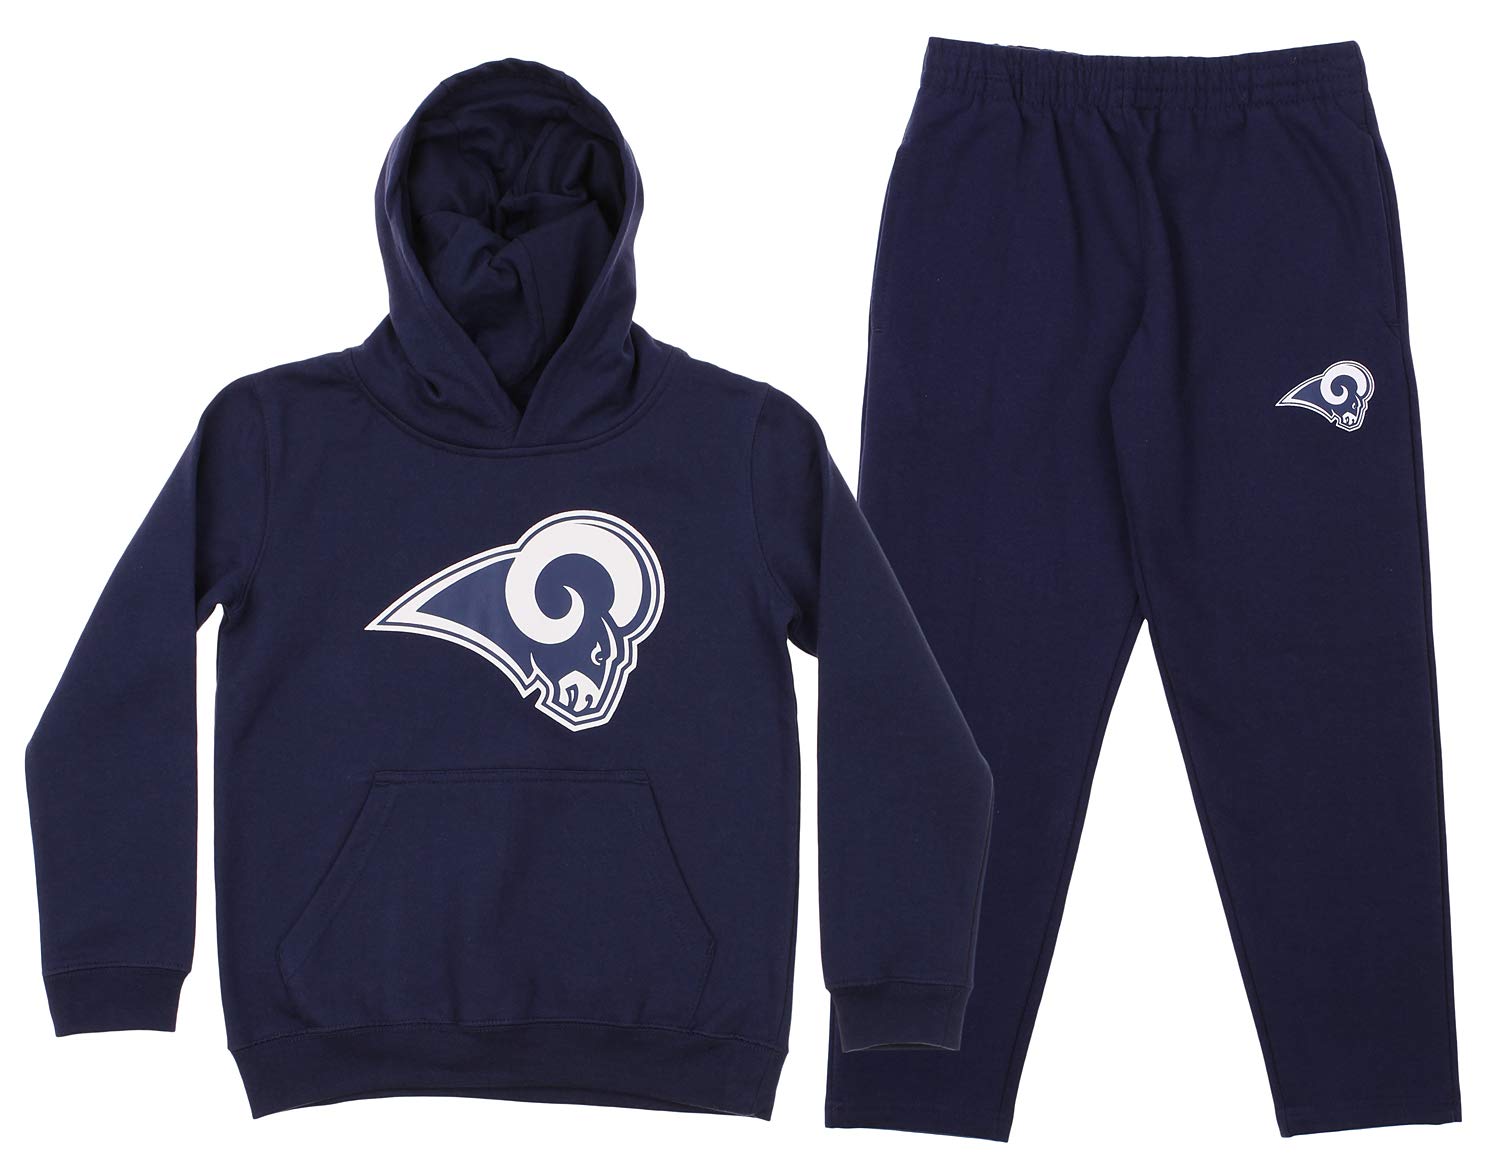 Outerstuff NFL Youth Boys (8-20) Team Color Fleece Hoodie and Pant Set, Pick A Team